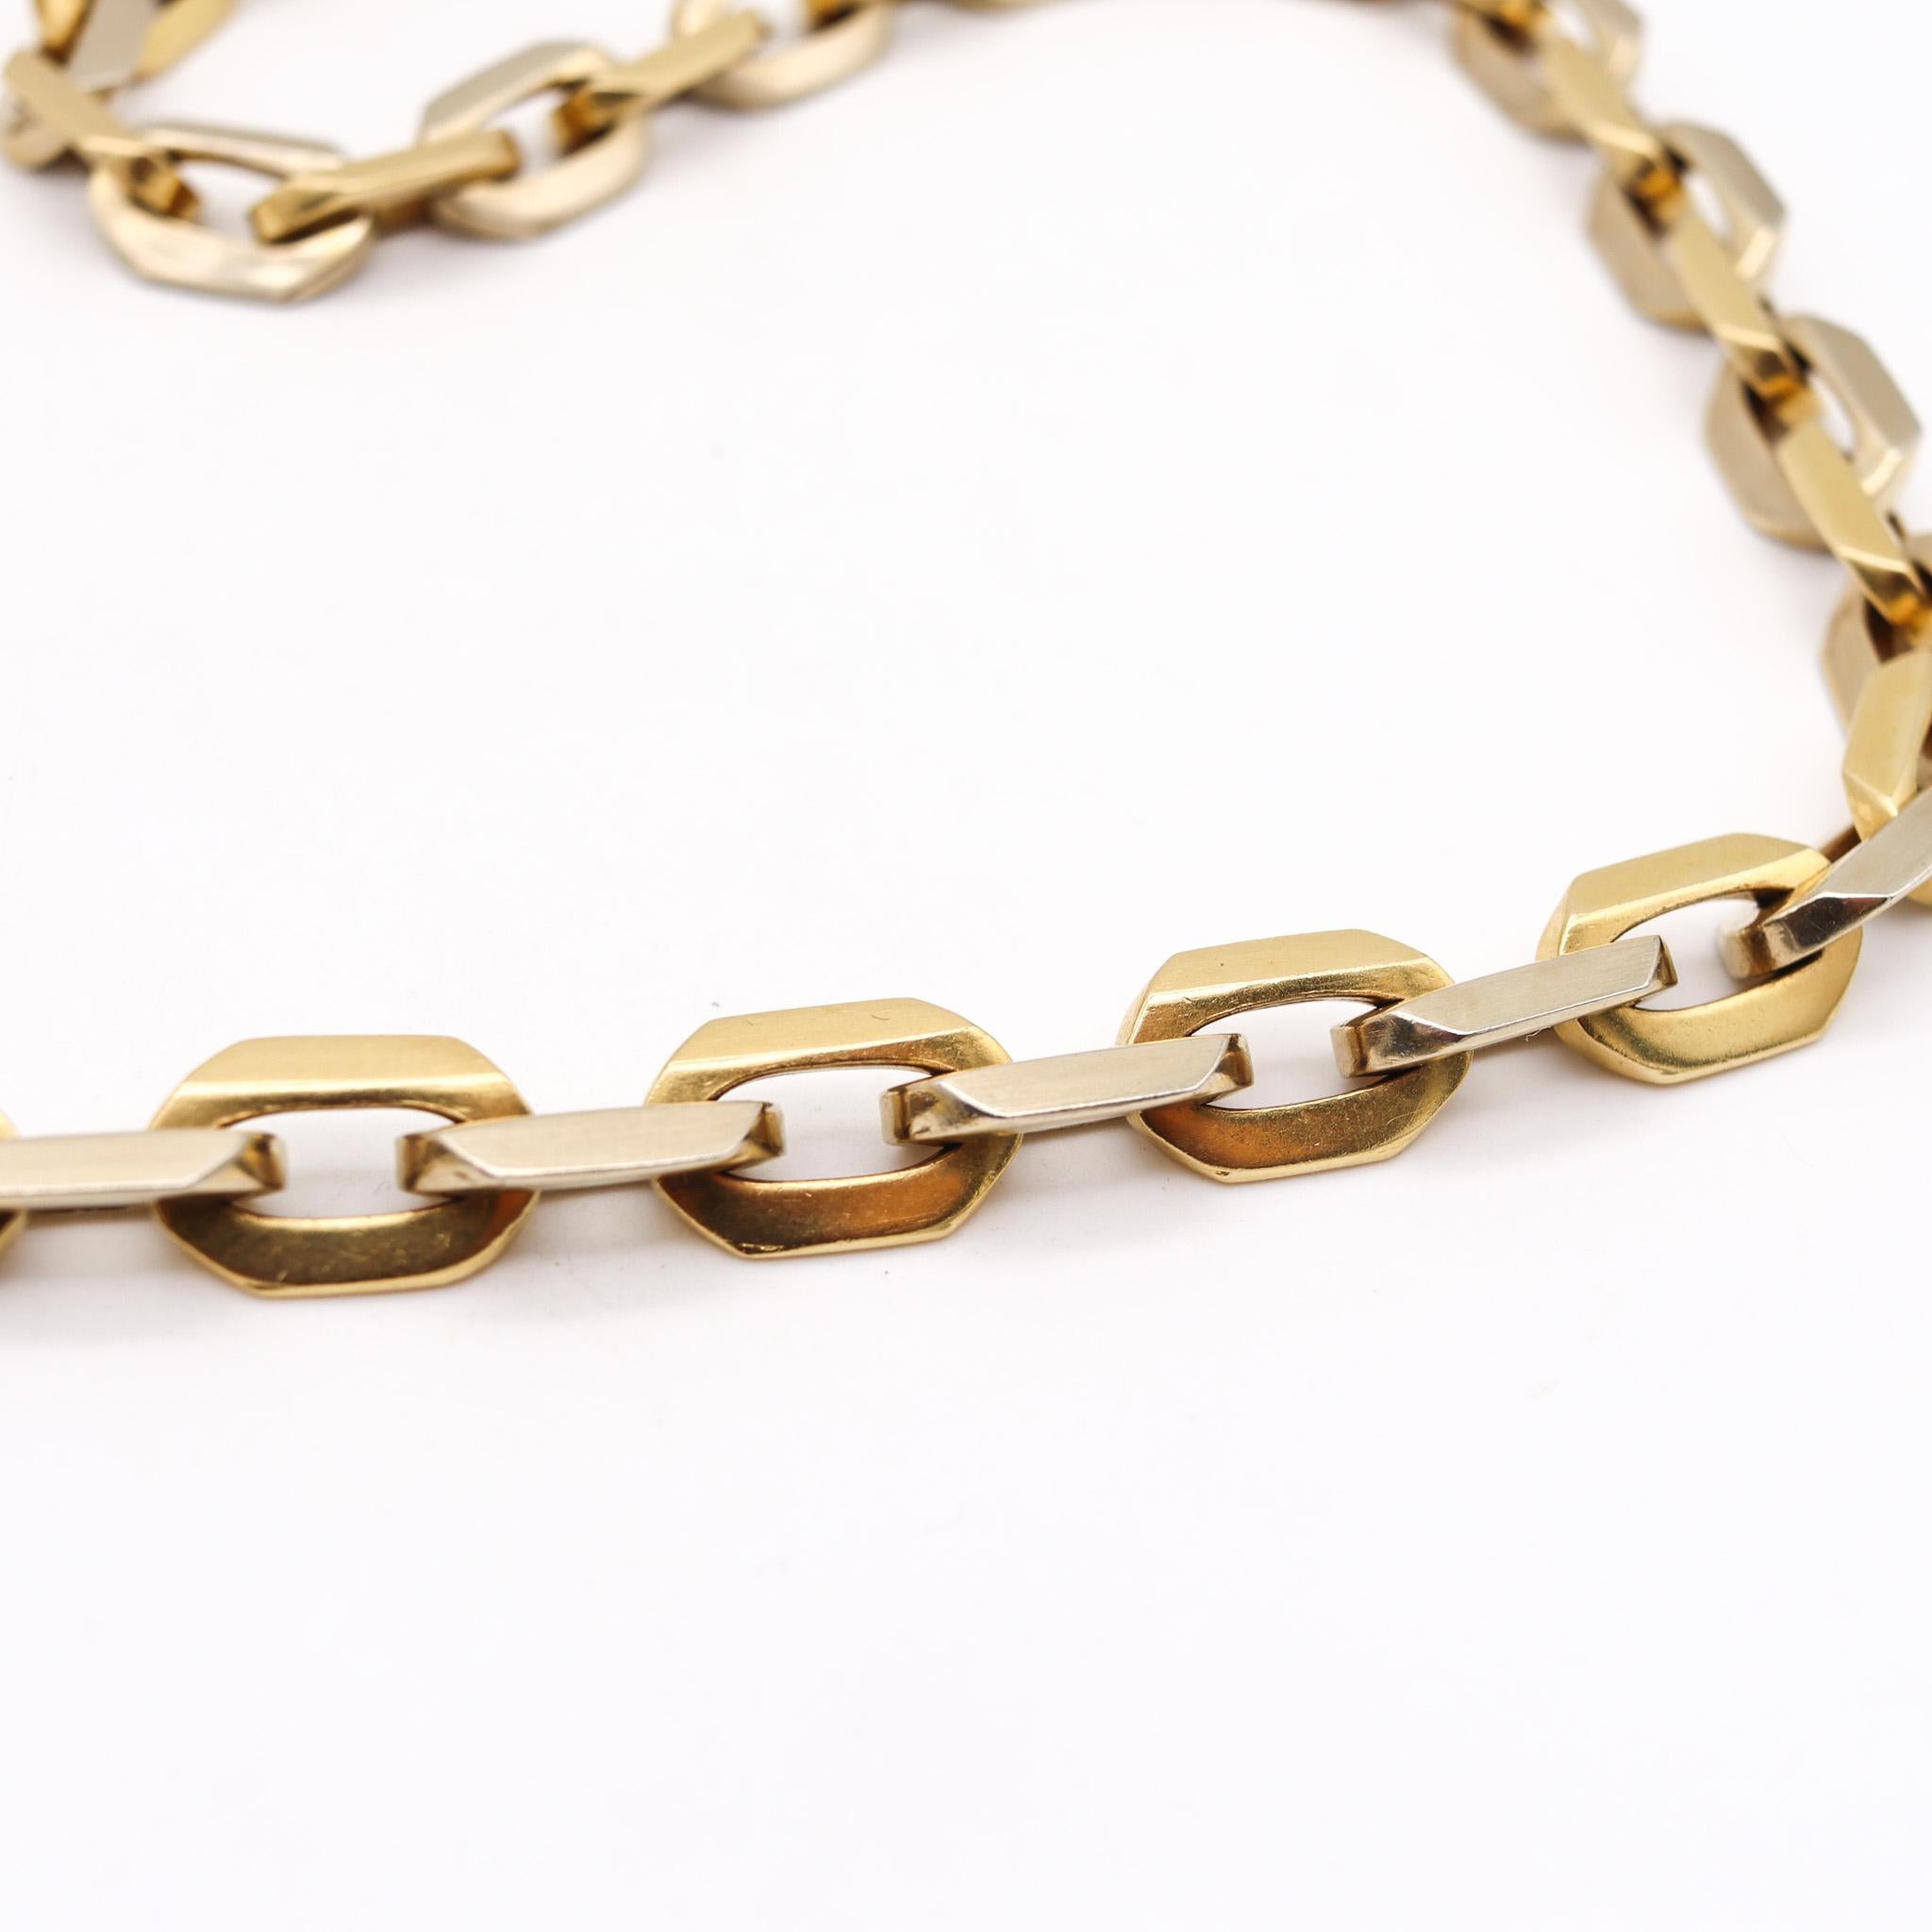 Bold necklace chain designed by Gübelin.

Fabulous statement chain, created in Zurich Switzerland by the jewelry house of Gübelin, back in the 1970. This long sautoir chain has been assembled with seventysix geometric links, crafted in solid yellow